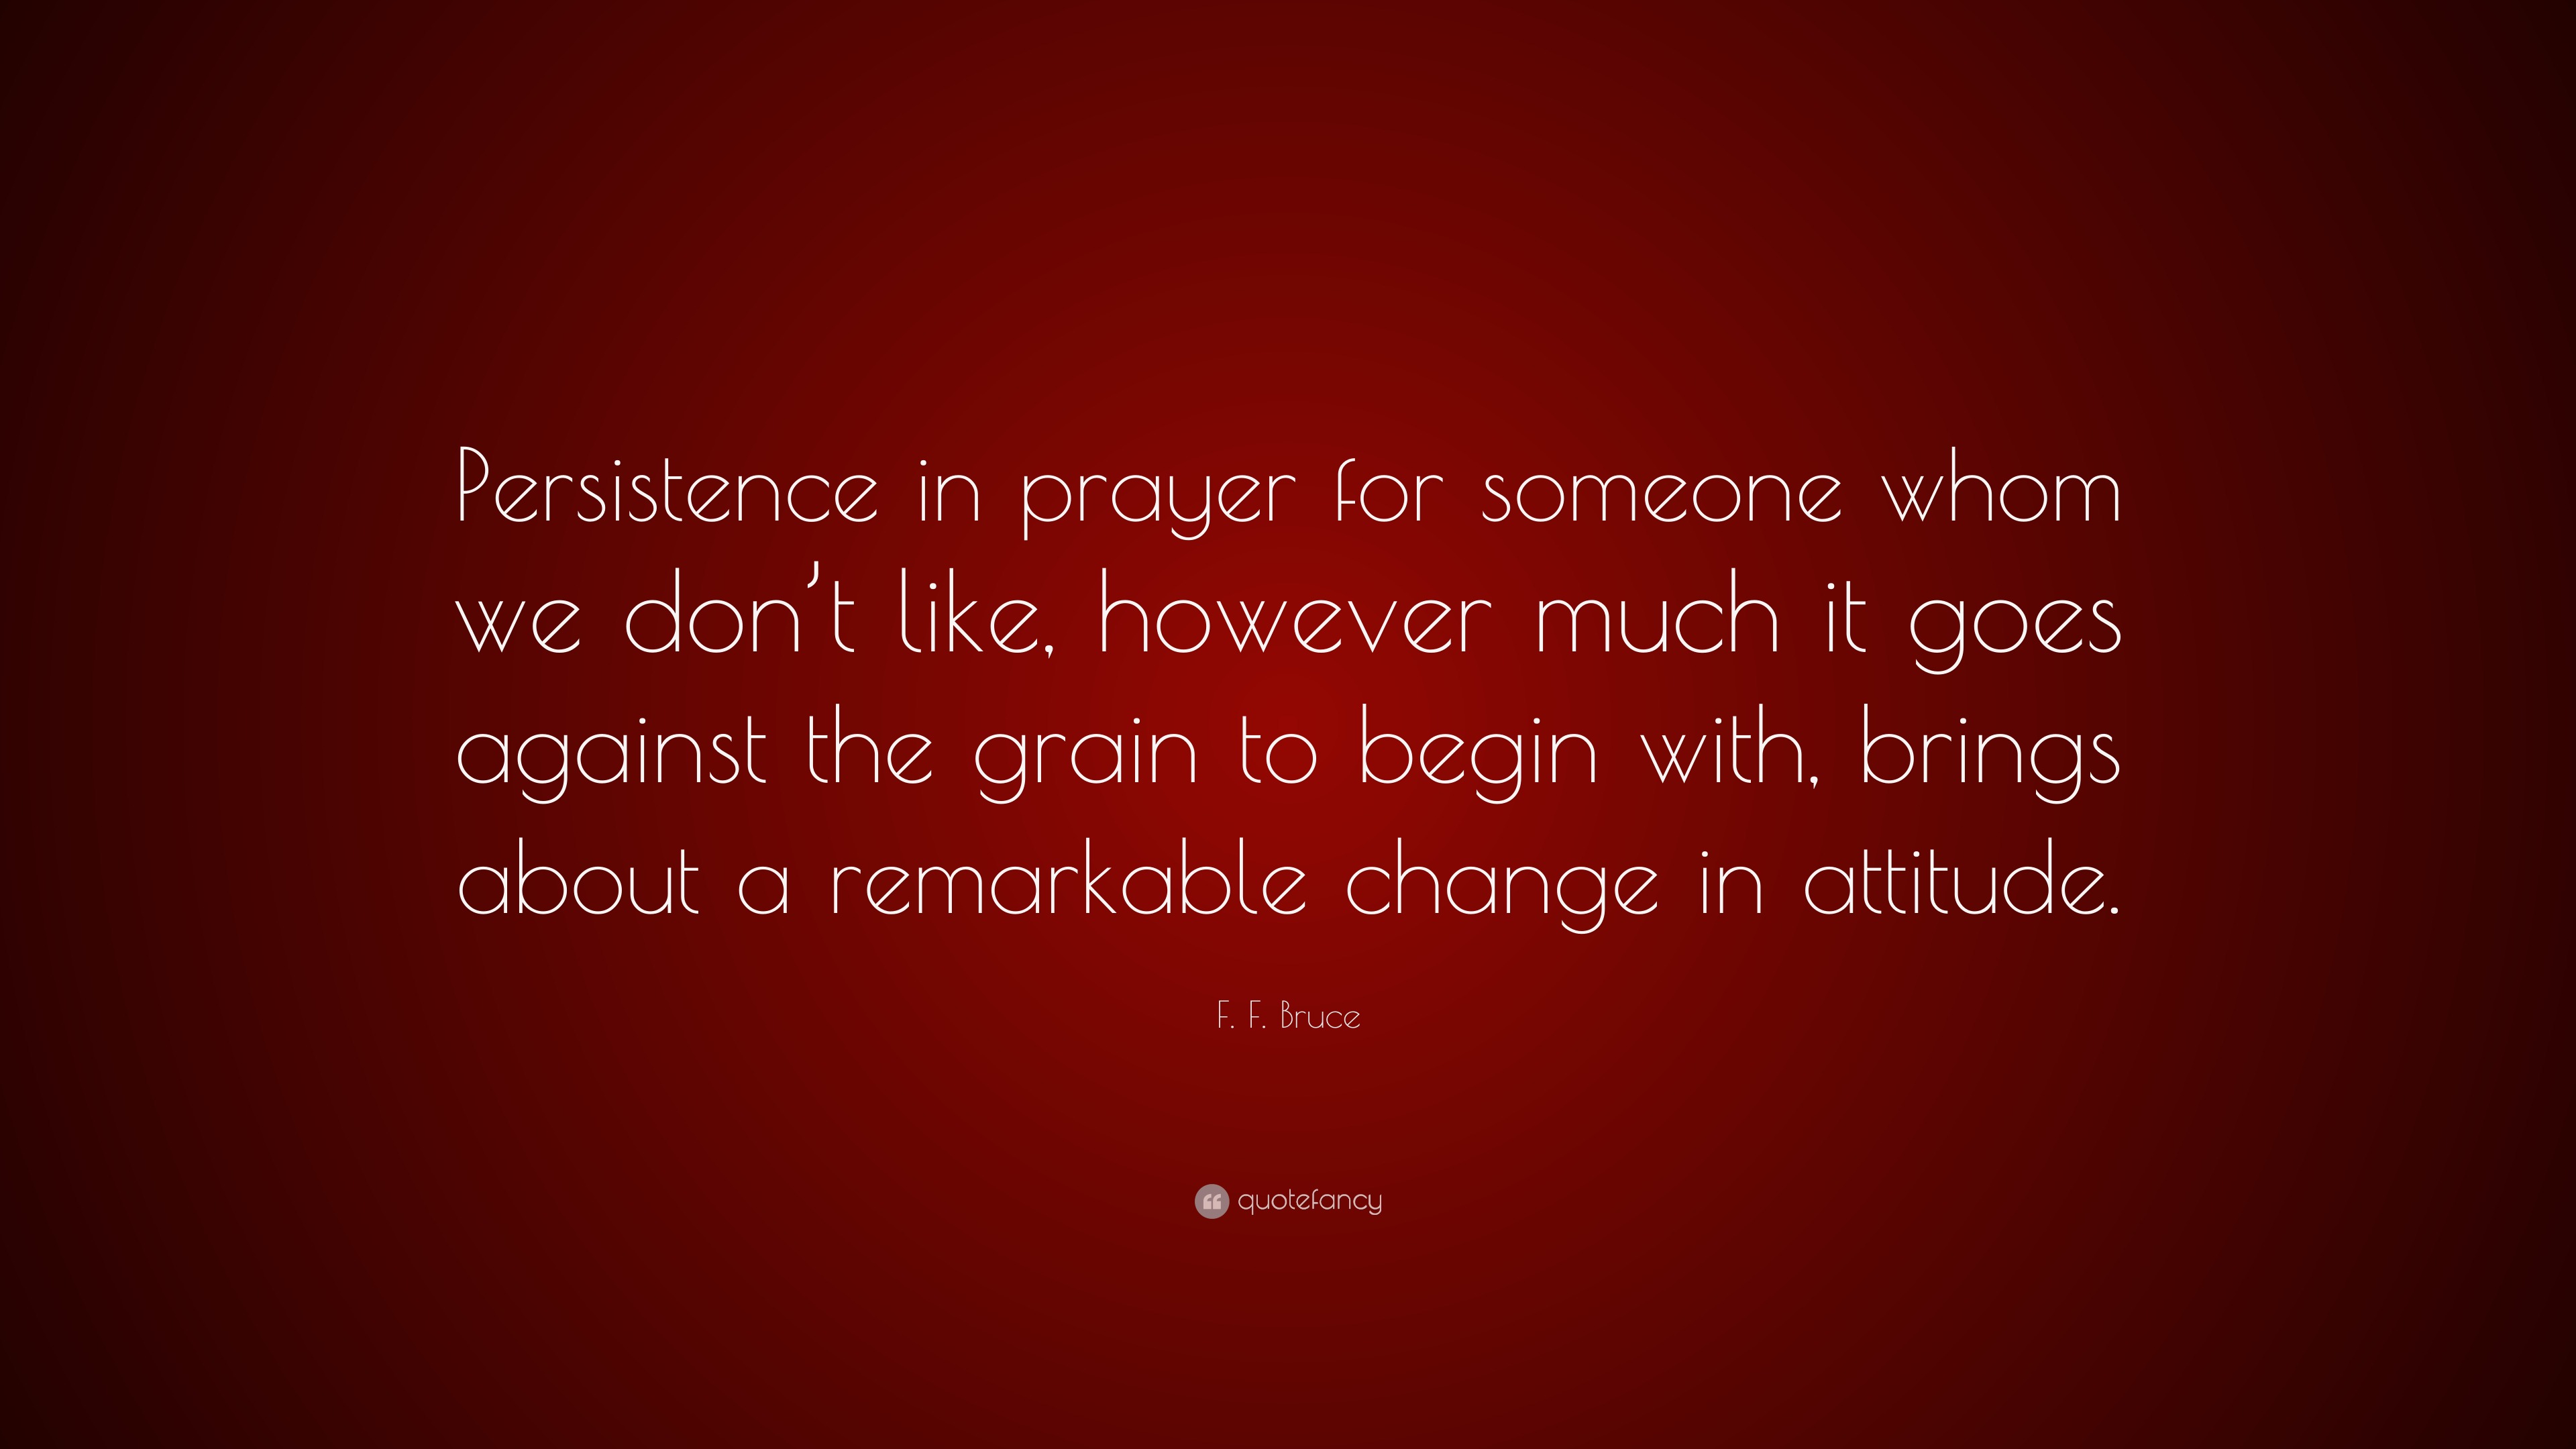 F. F. Bruce Quote: “Persistence in prayer for someone whom we don’t ...